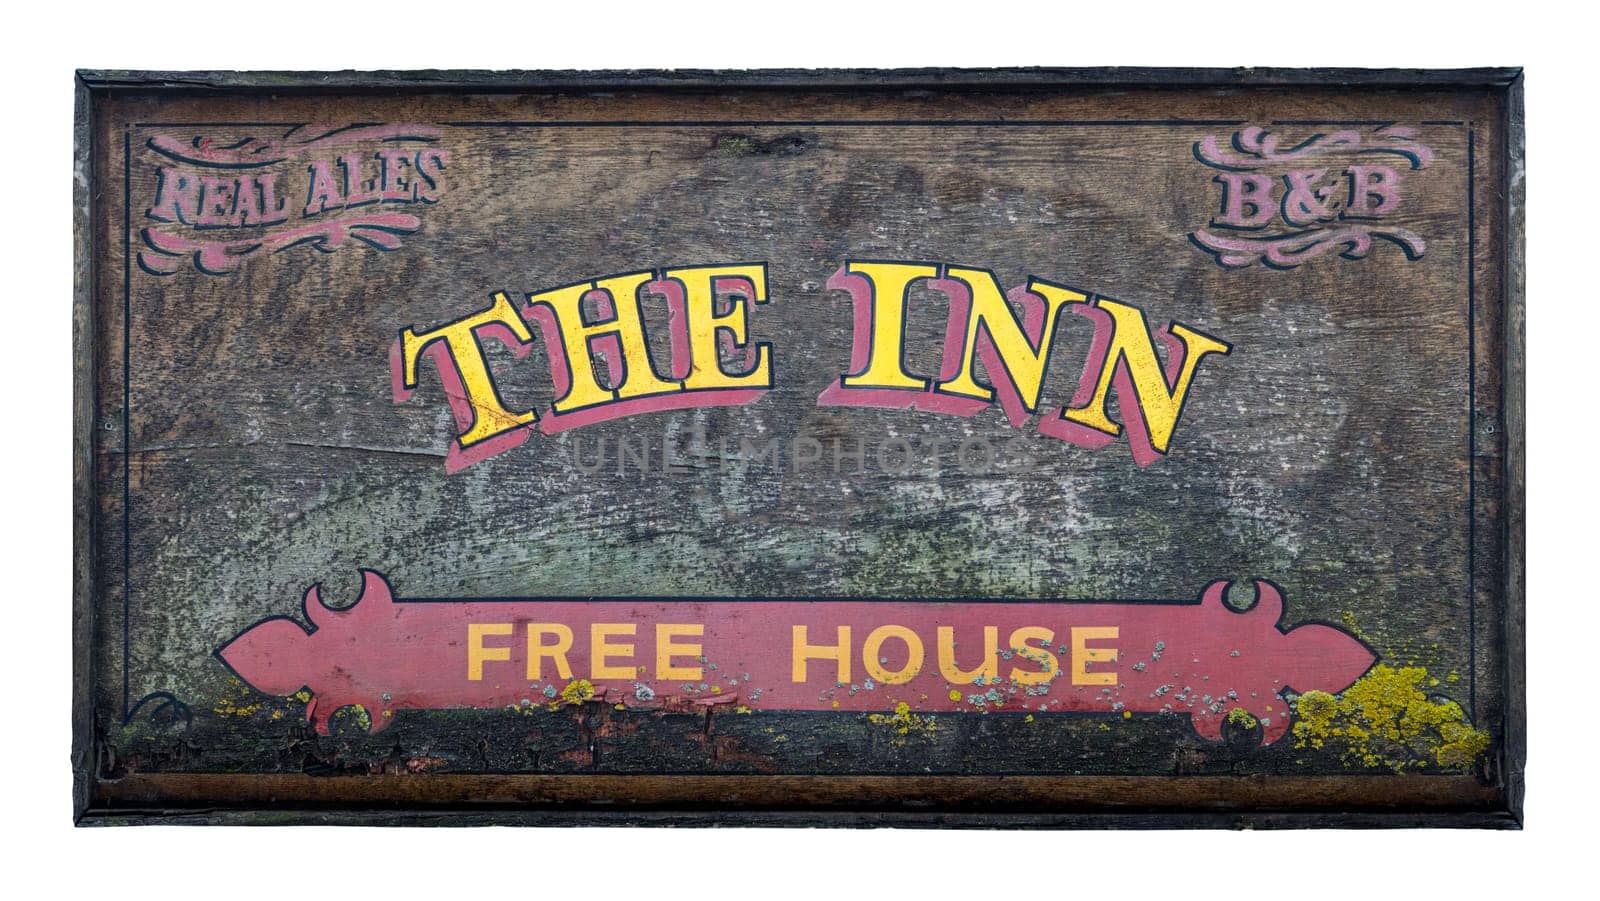 Rustic Old Sign For A Traditional (Not Real) Inn And Pub In England, Isolated On A White Background